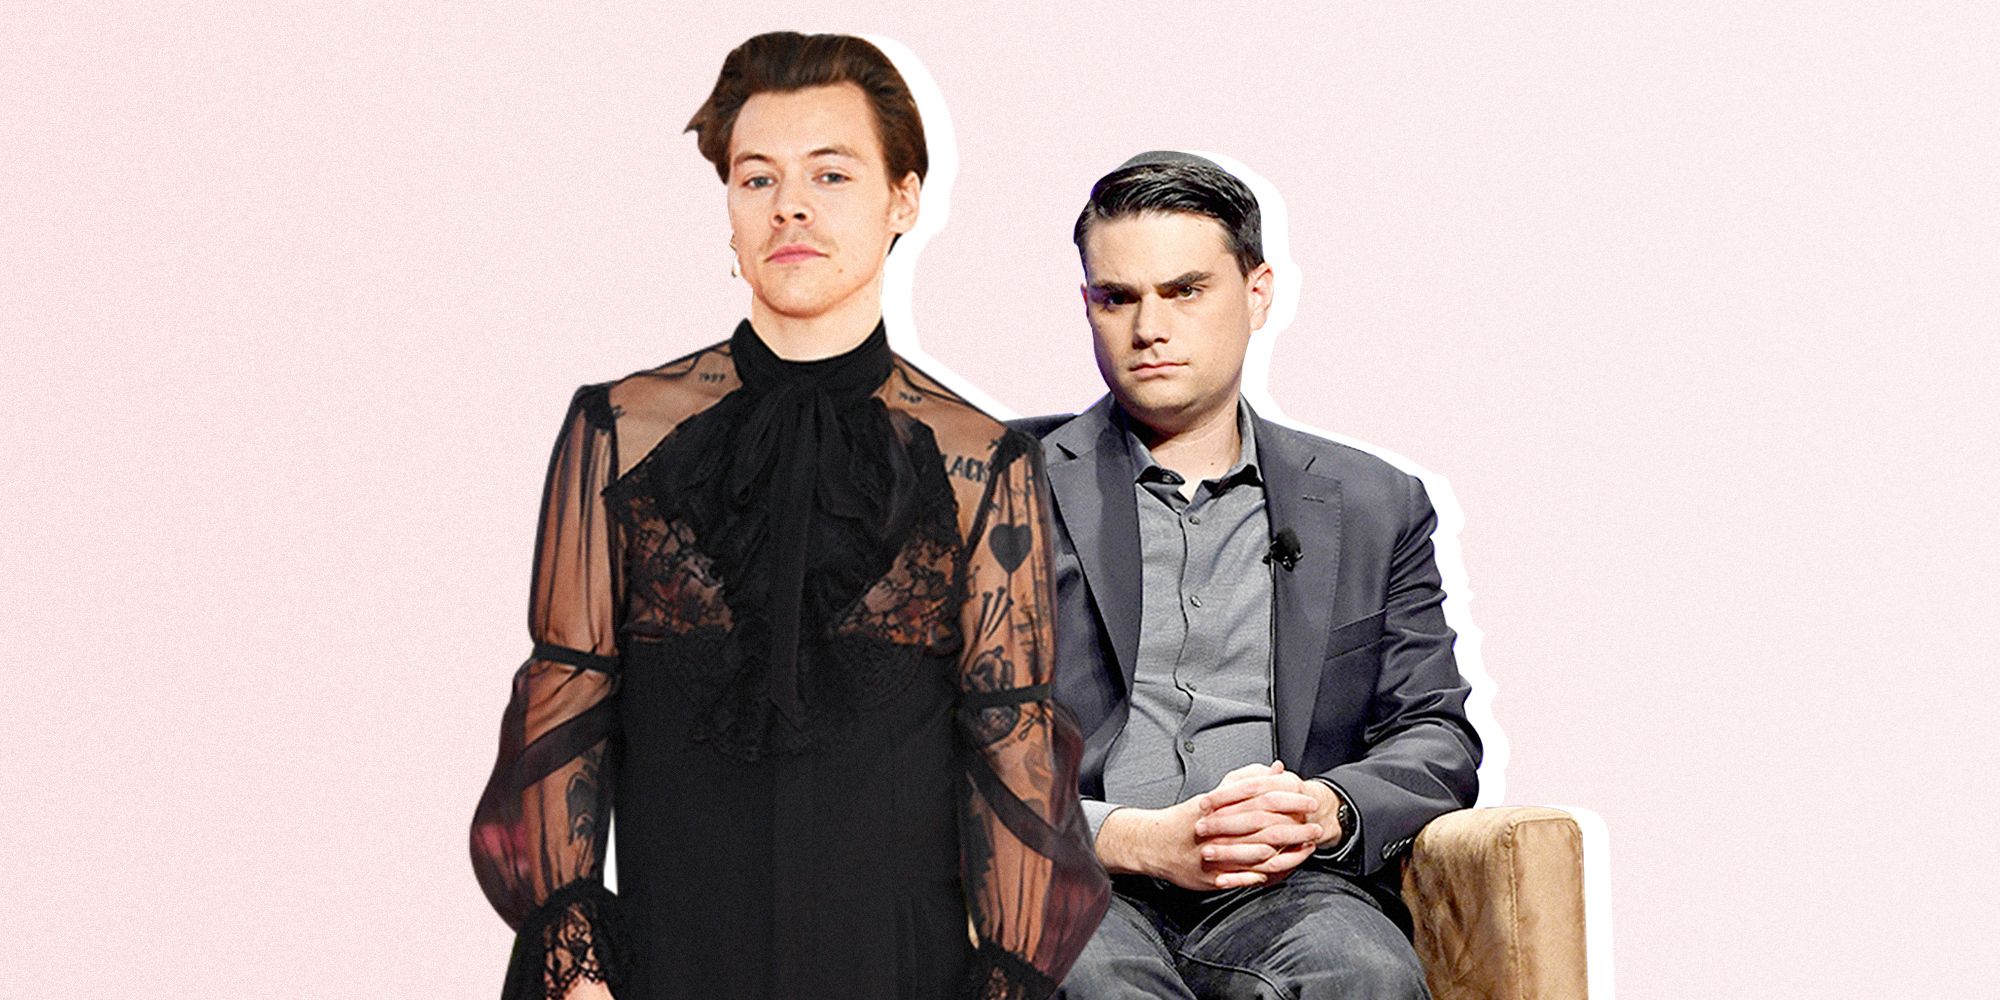 Harry Styles: Why His Fashion Sense Just Keeps Getting Better